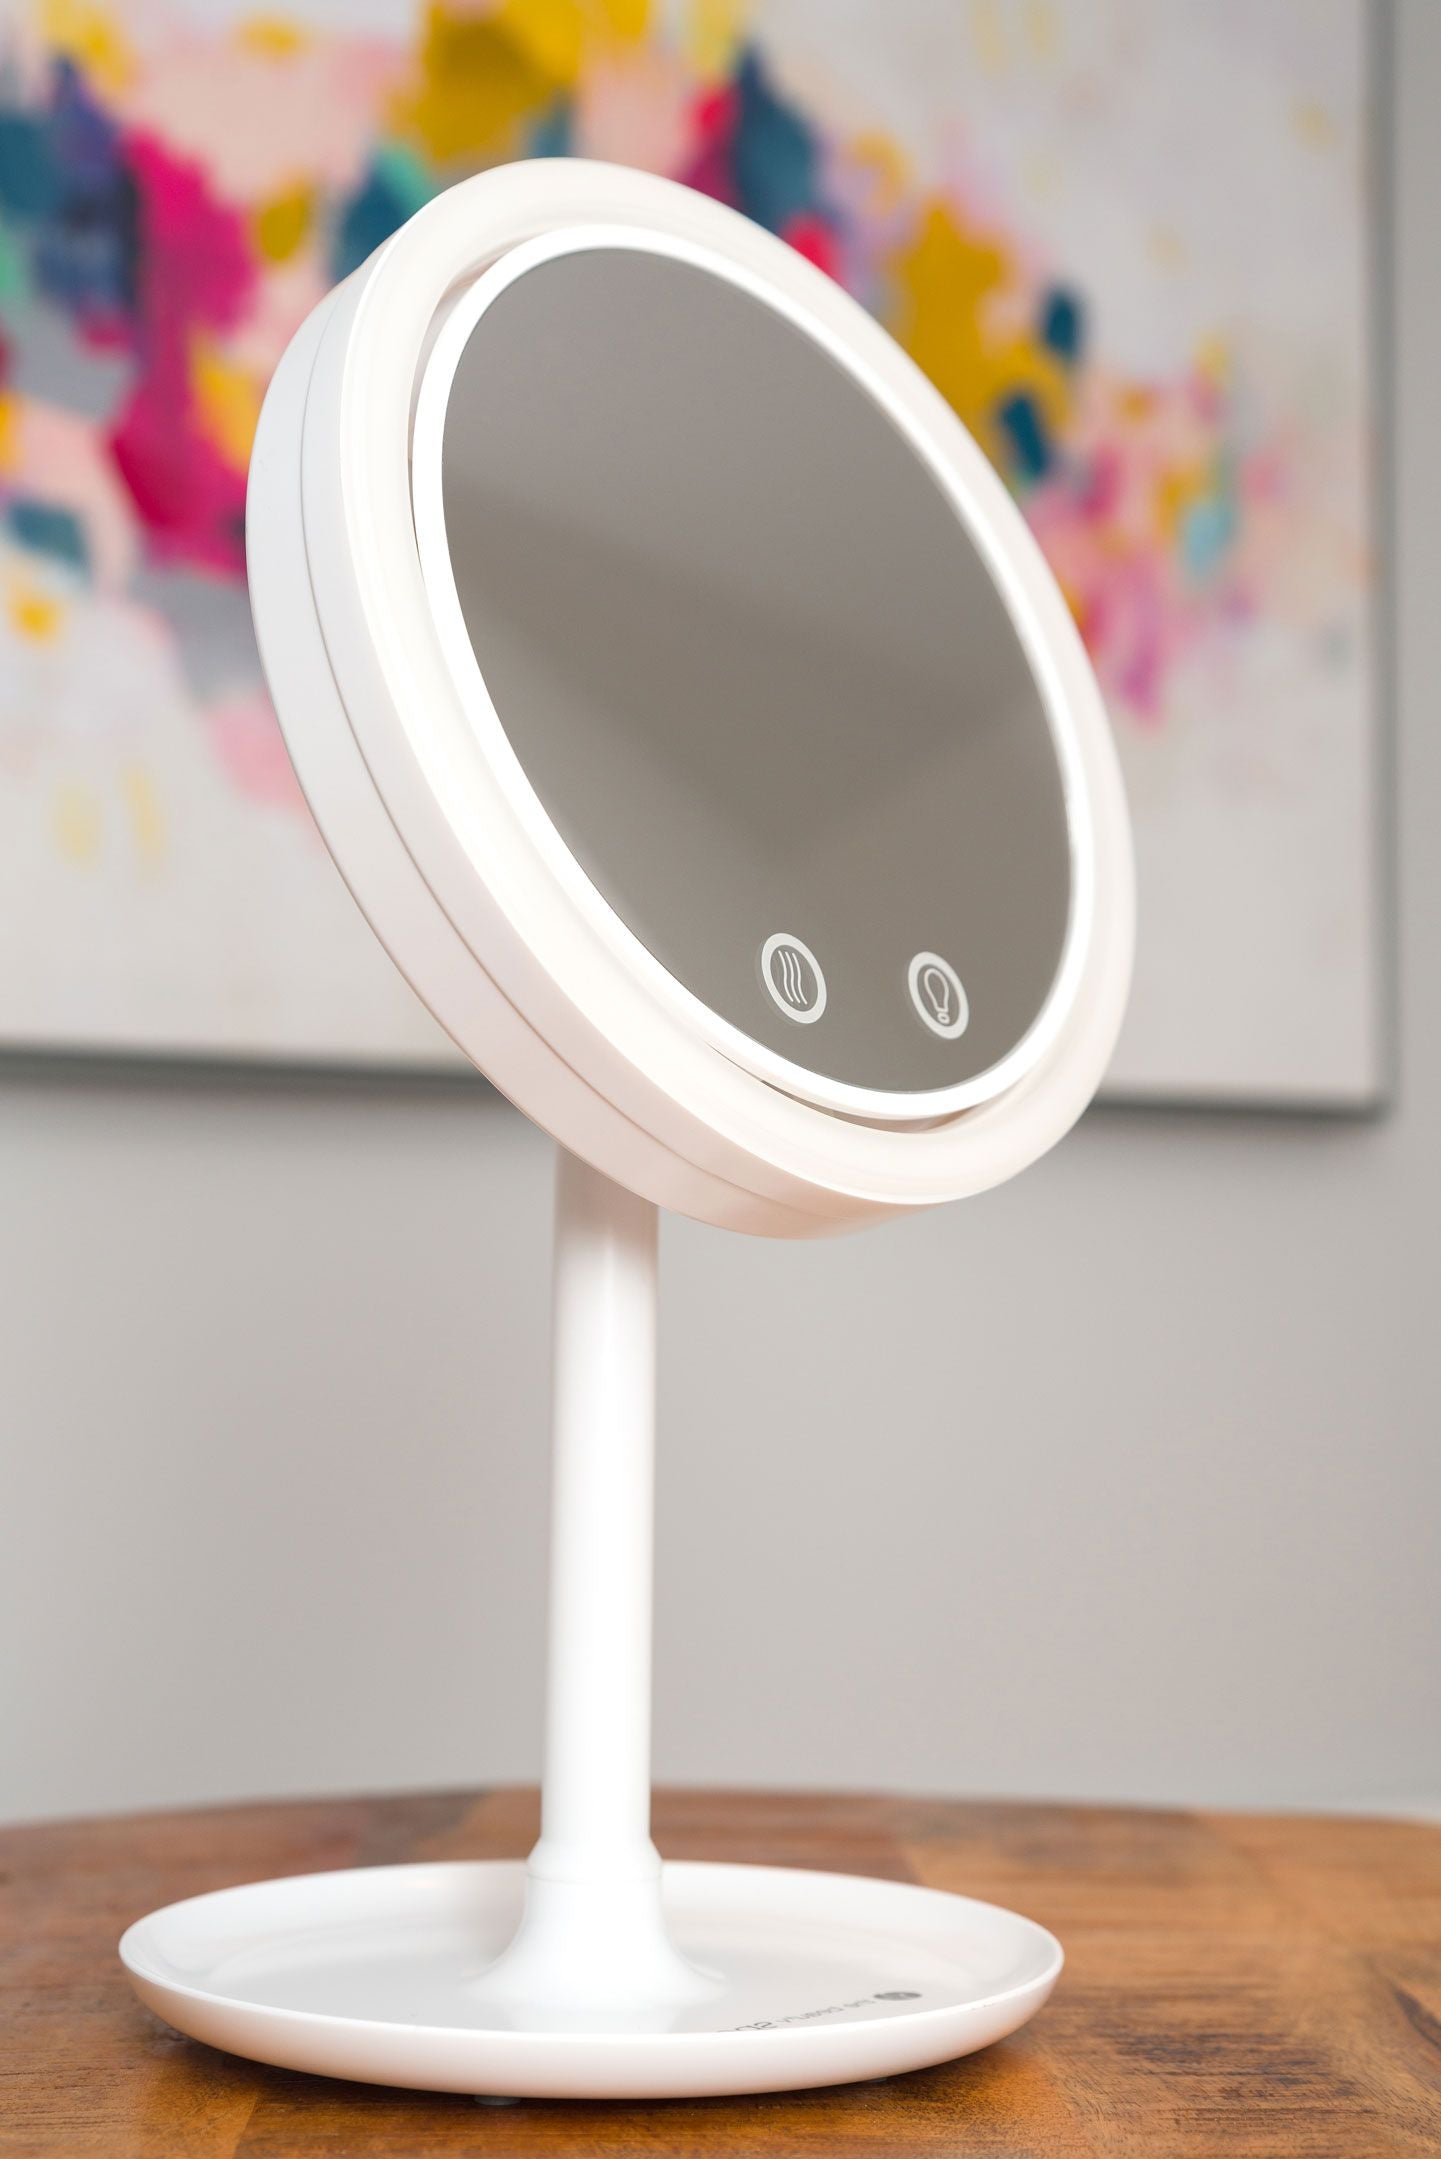 keep cool mirror with fan and LED light ring on wooden table in a home setting with LED ring light illuminated 